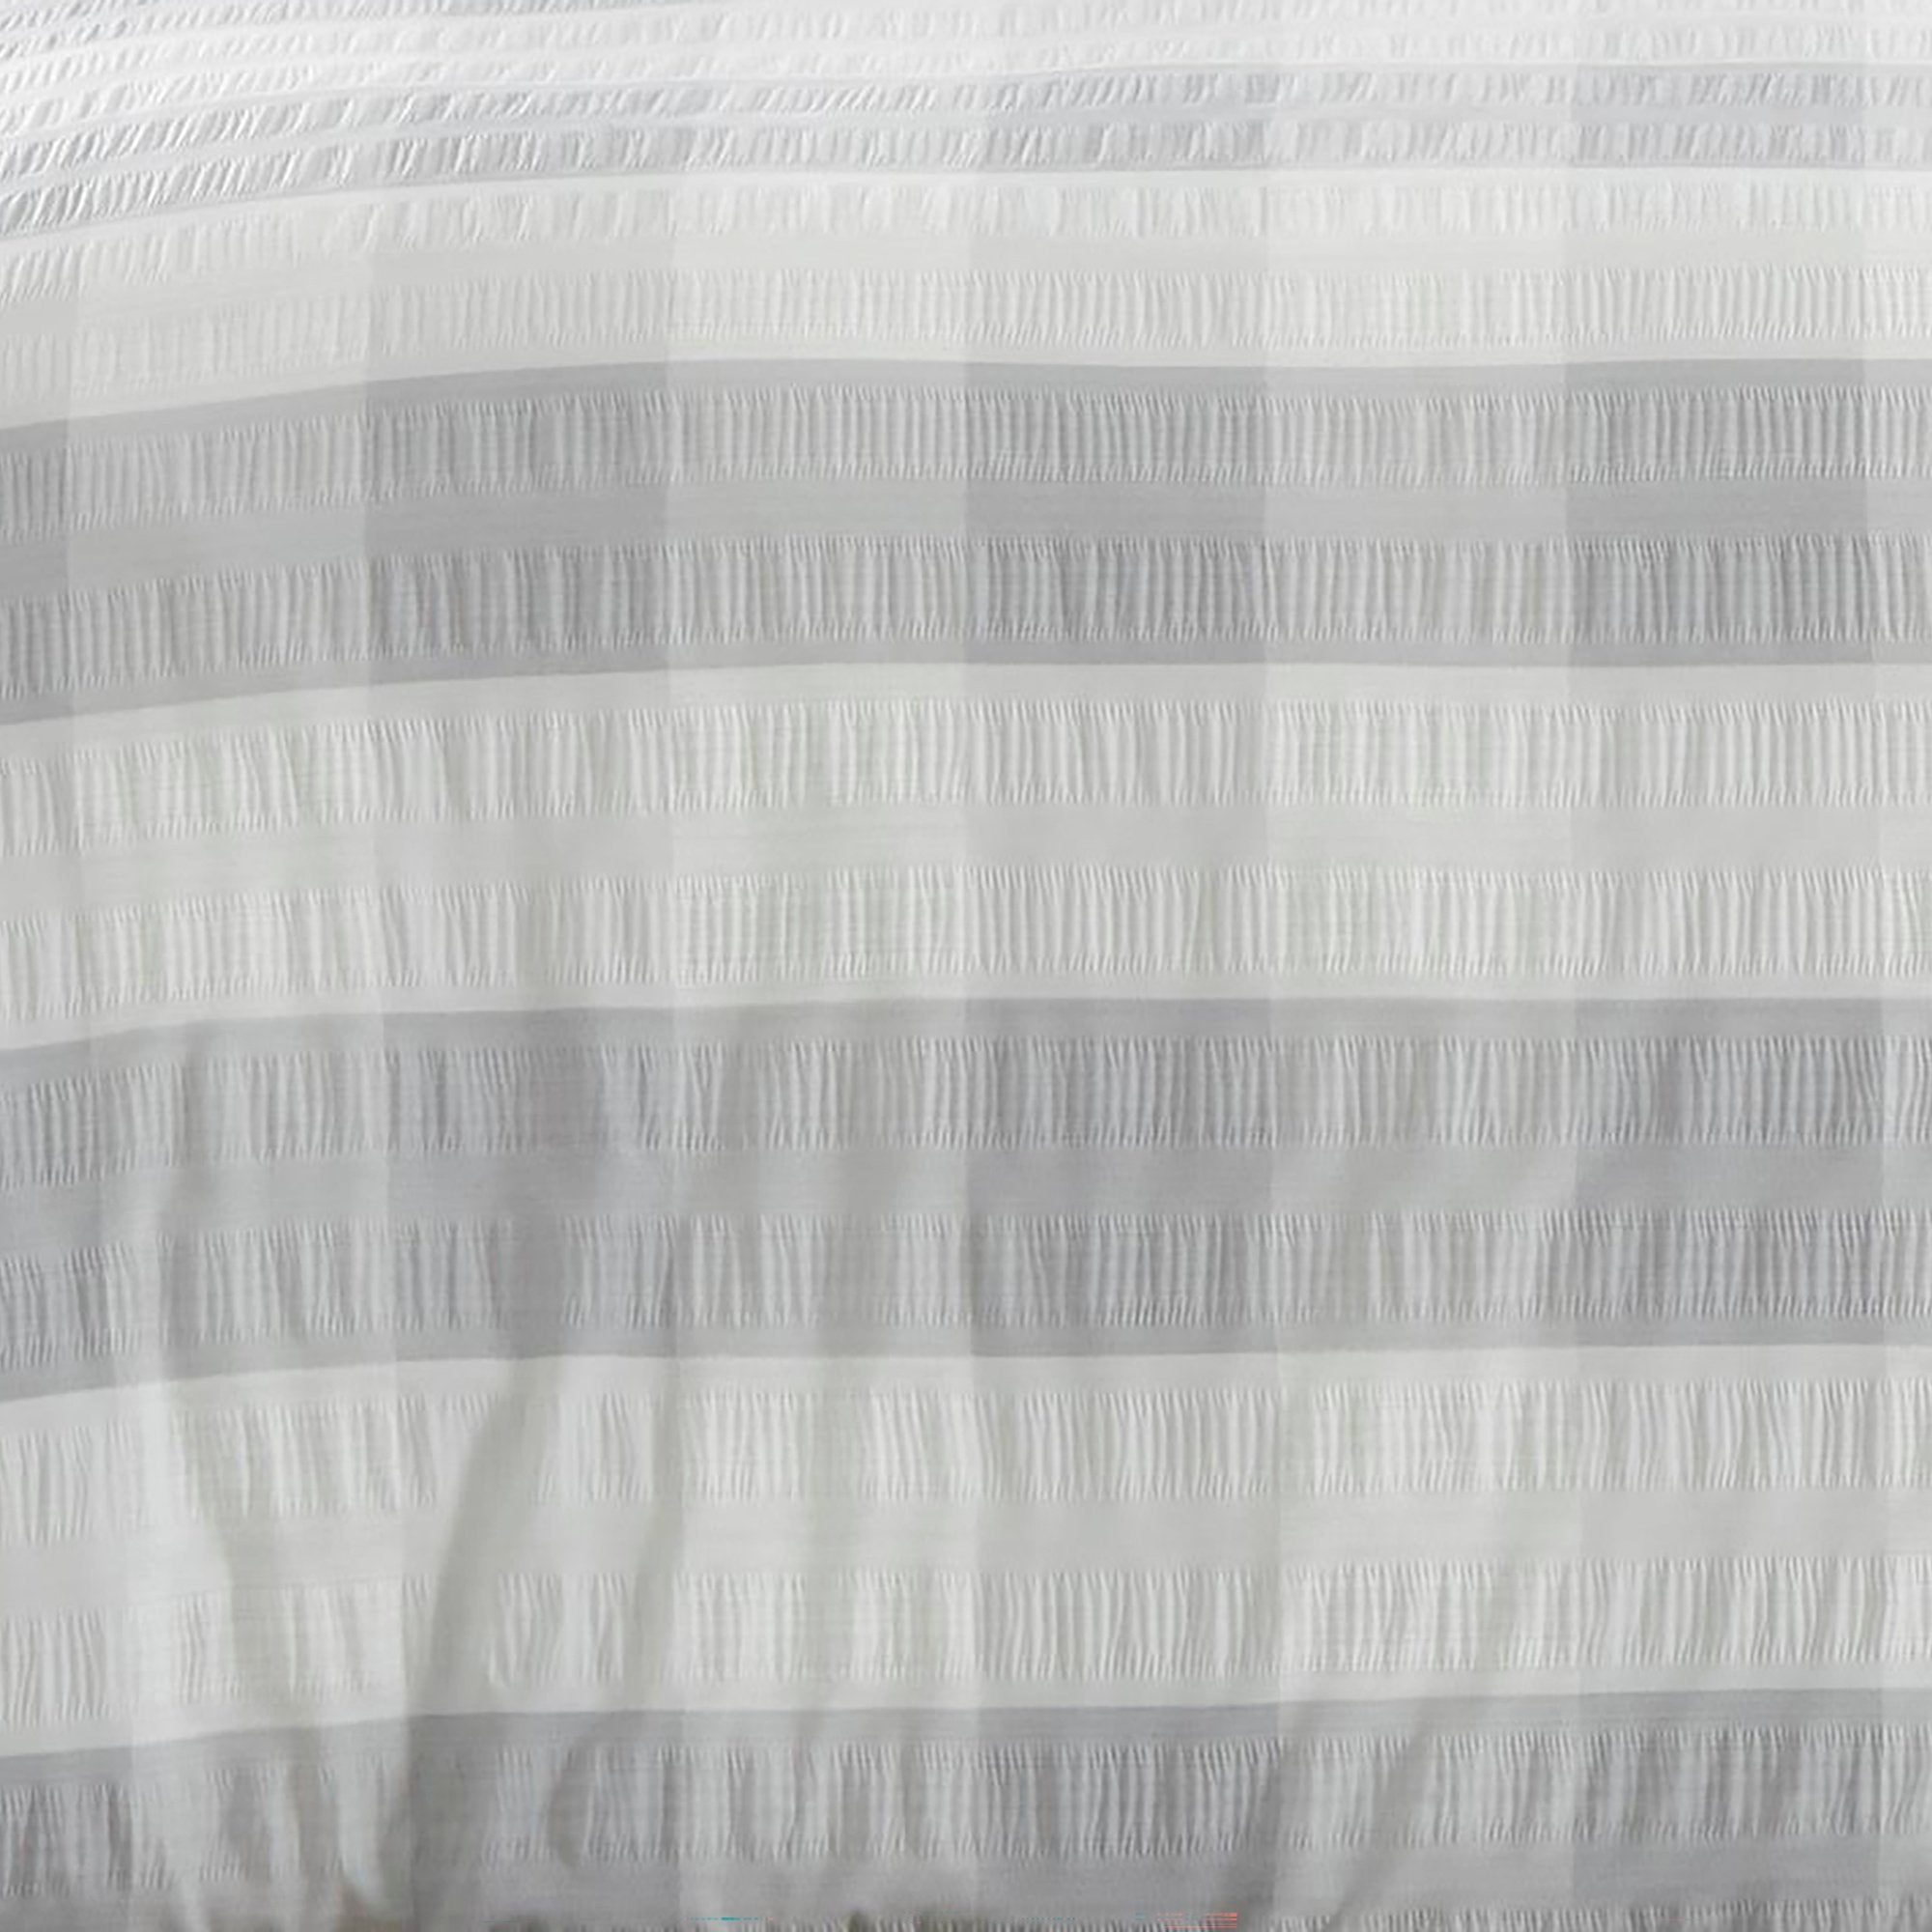 Duvet Cover Set Seersucker Gingham by Fusion in Silver